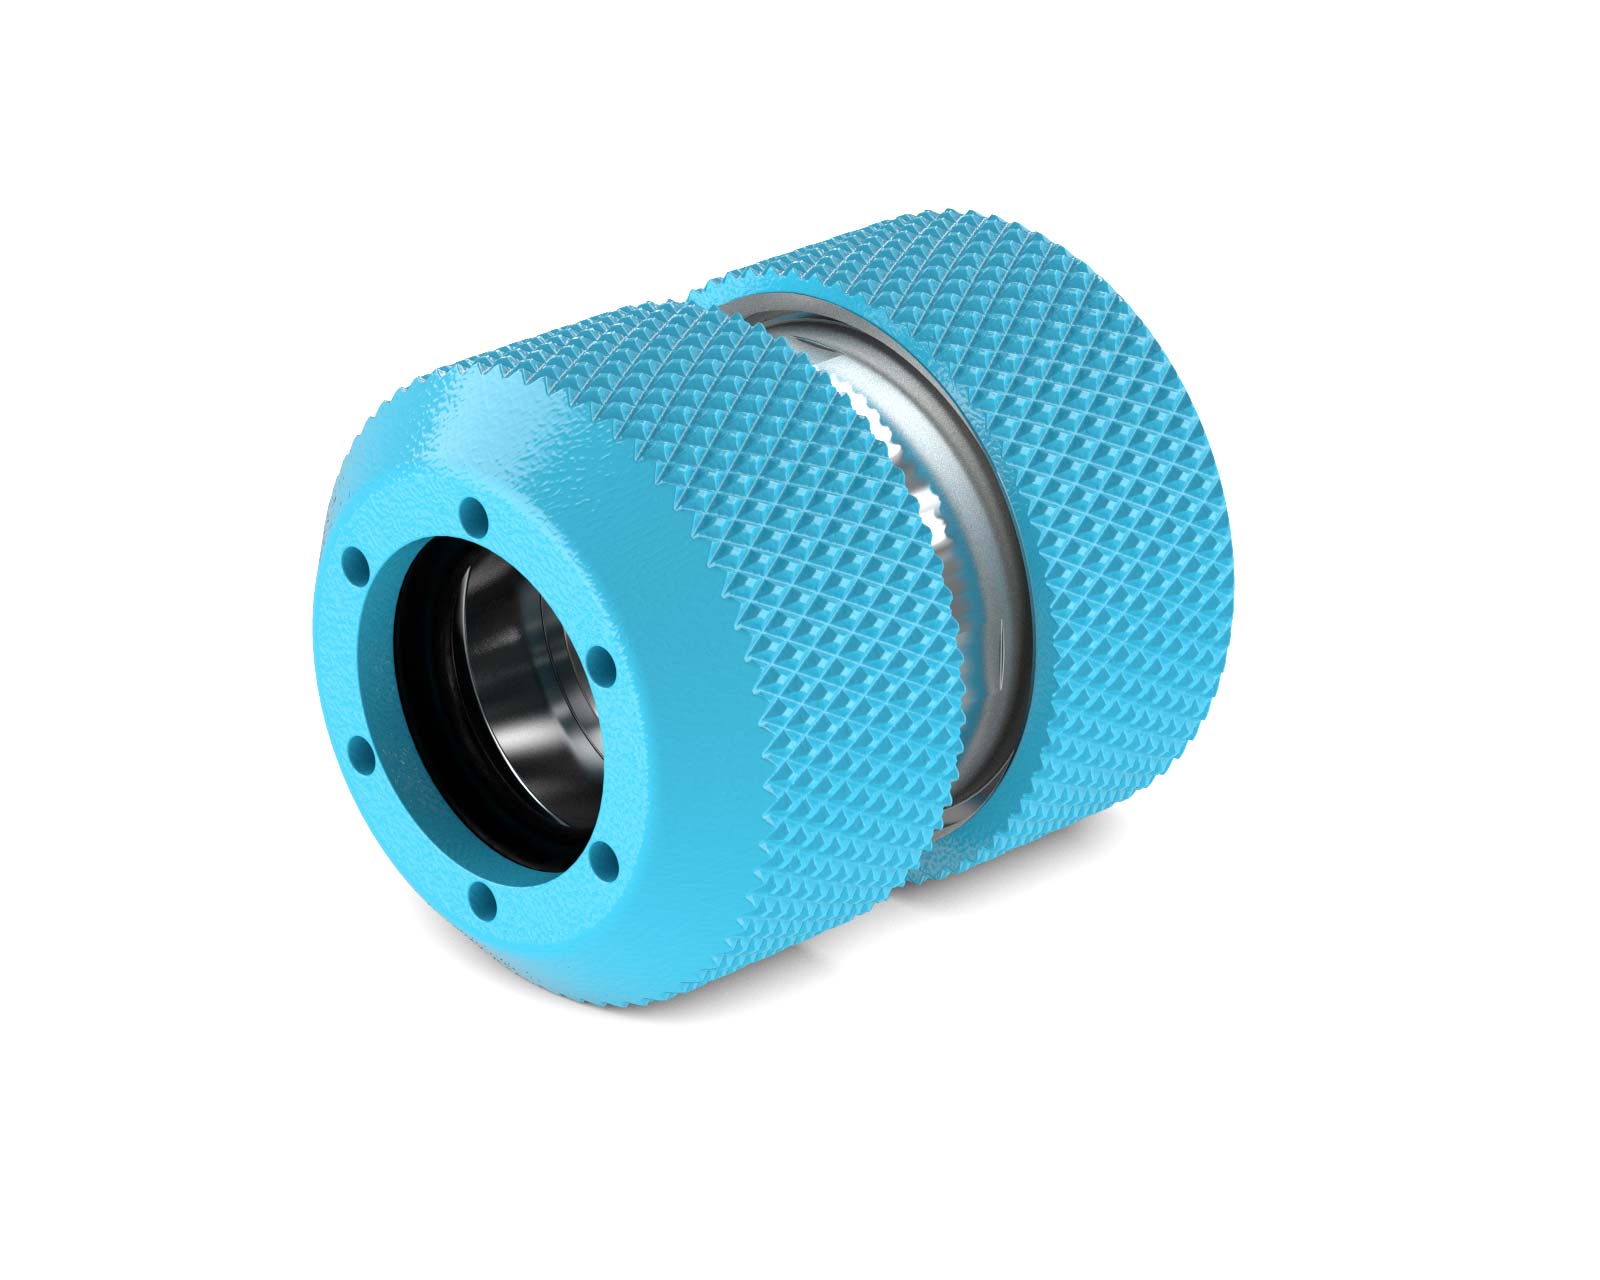 PrimoChill 1/2in. Rigid RevolverSX Series Coupler Fitting - PrimoChill - KEEPING IT COOL Sky Blue